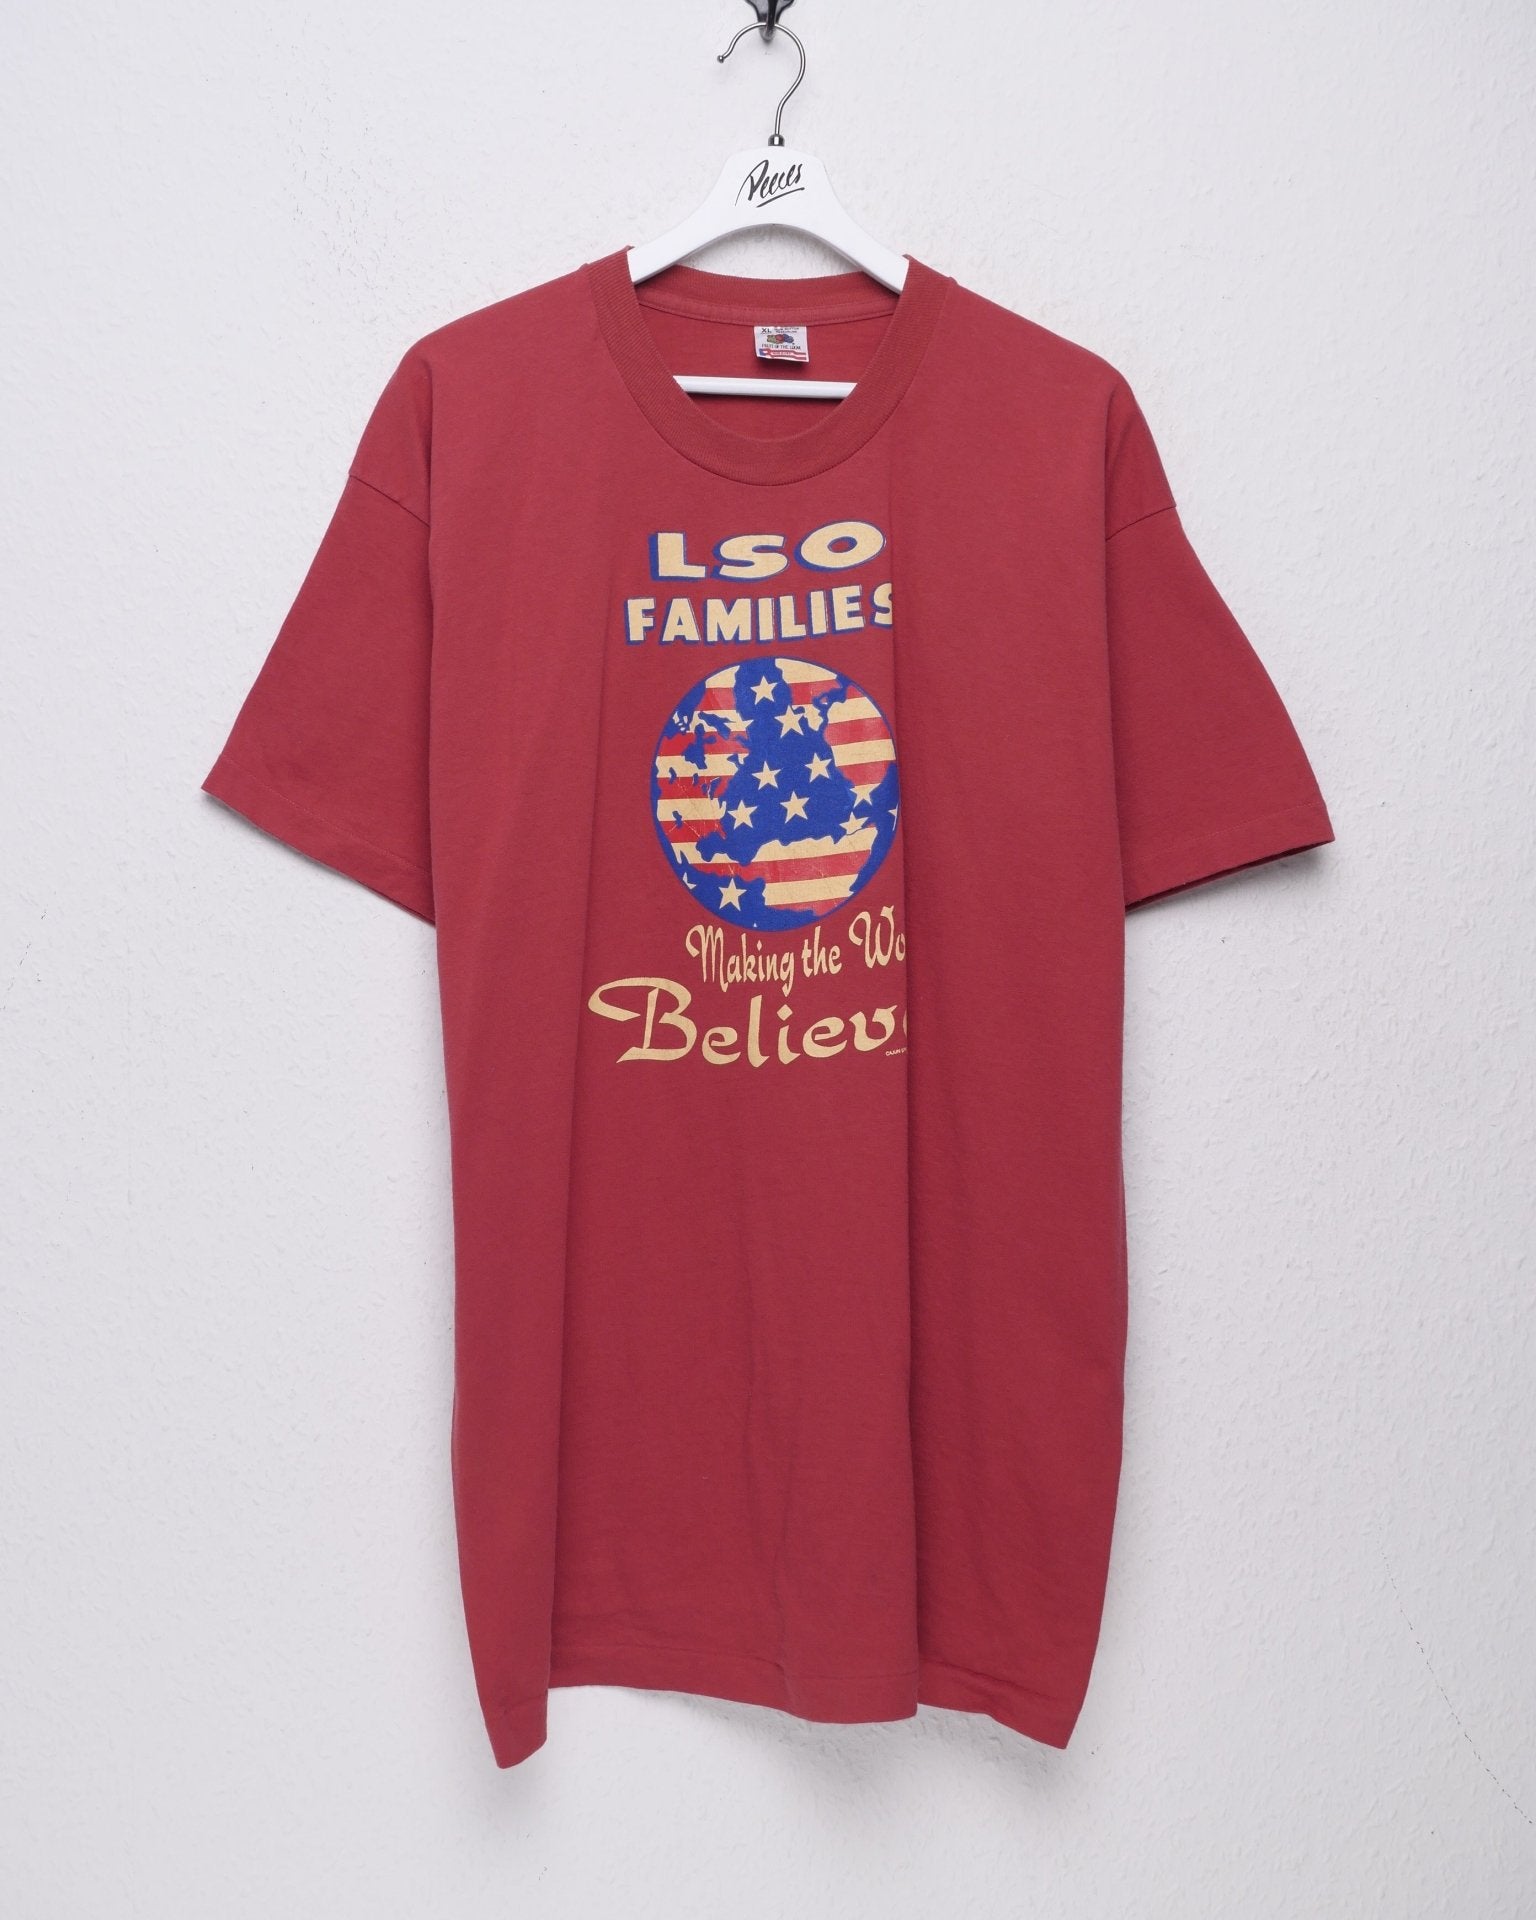 'LSO Families' printed Graphic red Shirt - Peeces